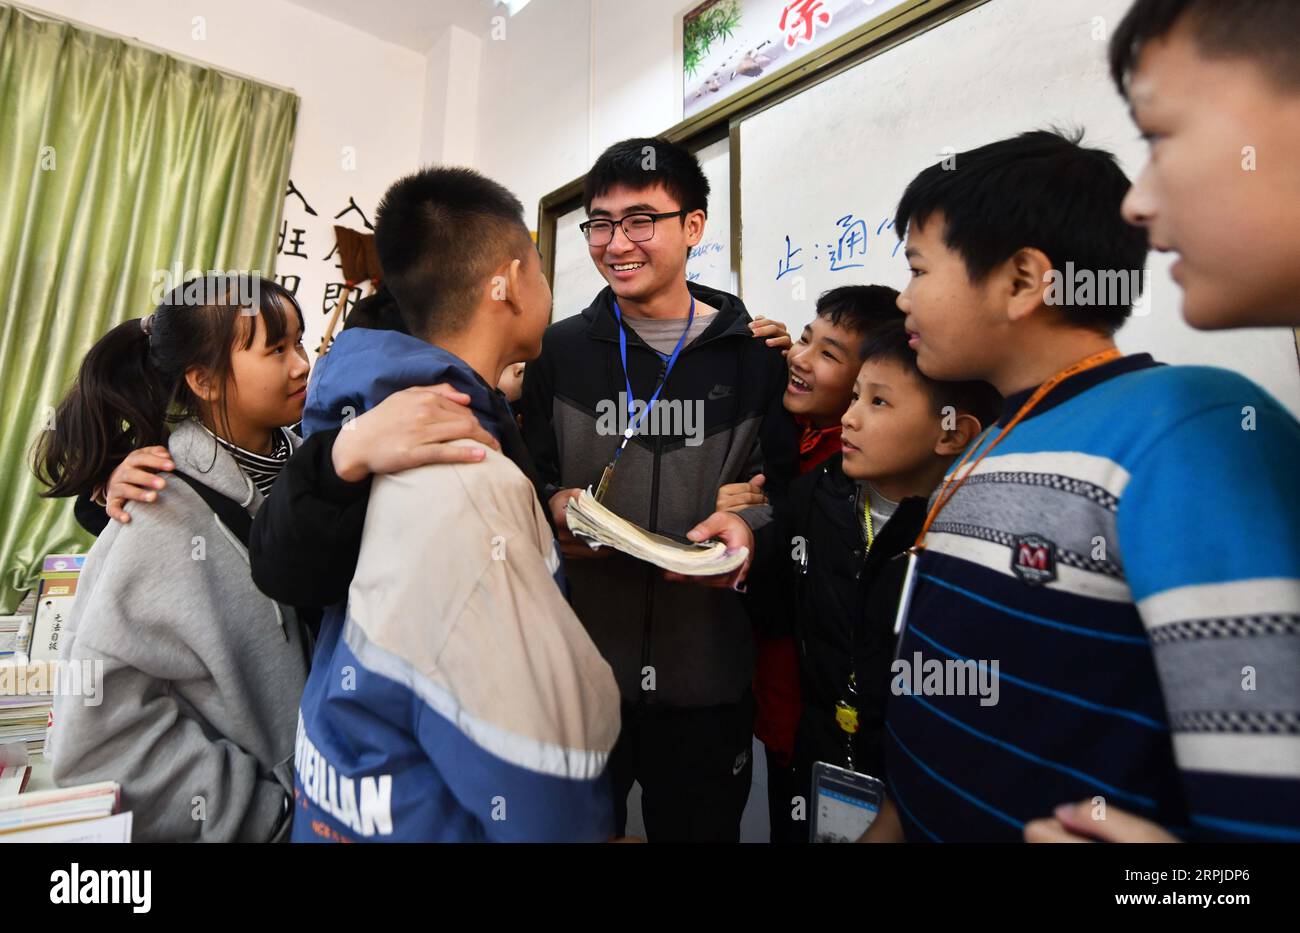 191206 -- RONGSHUI, Dec. 6, 2019 -- Xu Chenxi 3rd L, a postgraduate student of Northwestern Polytechnical University NPU who volunteers here as a head teacher, talks with students during class break at Siyuan Experimental School in Rongshui Miao Autonomous County, south China s Guangxi Zhuang Autonomous Region, Dec. 5, 2019. Rongshui is among the 20 deeply impoverished counties in south China s Guangxi. Off its 115 poor villages, 73 are deeply impoverished. Since 2015, the NPU has launched educational assistance to the county where education level is low. Relying on its S&T as well as educatio Stock Photo